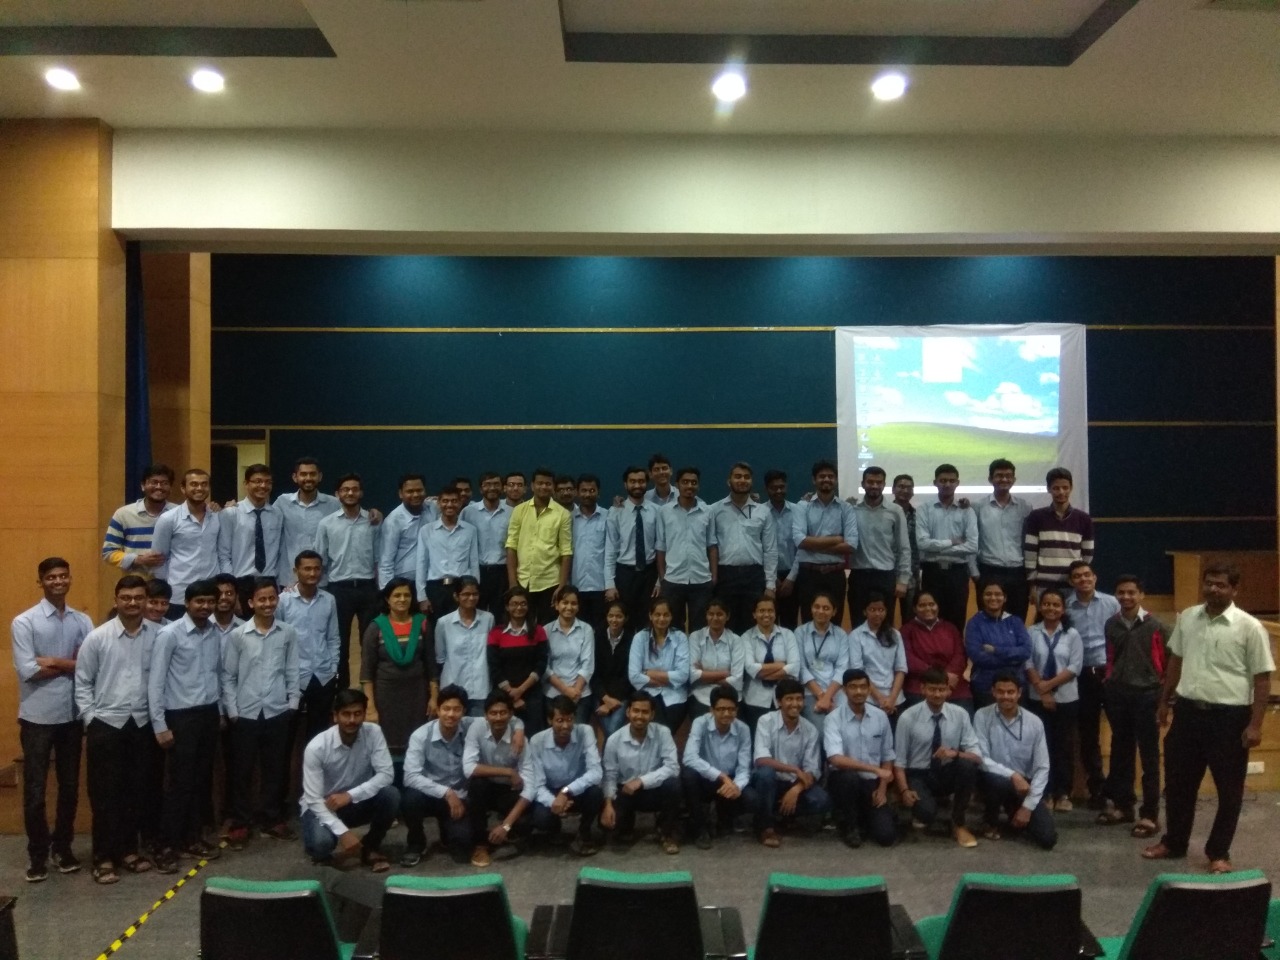 Our group photo at MIT ID,Loni Kalbhor,Pune.